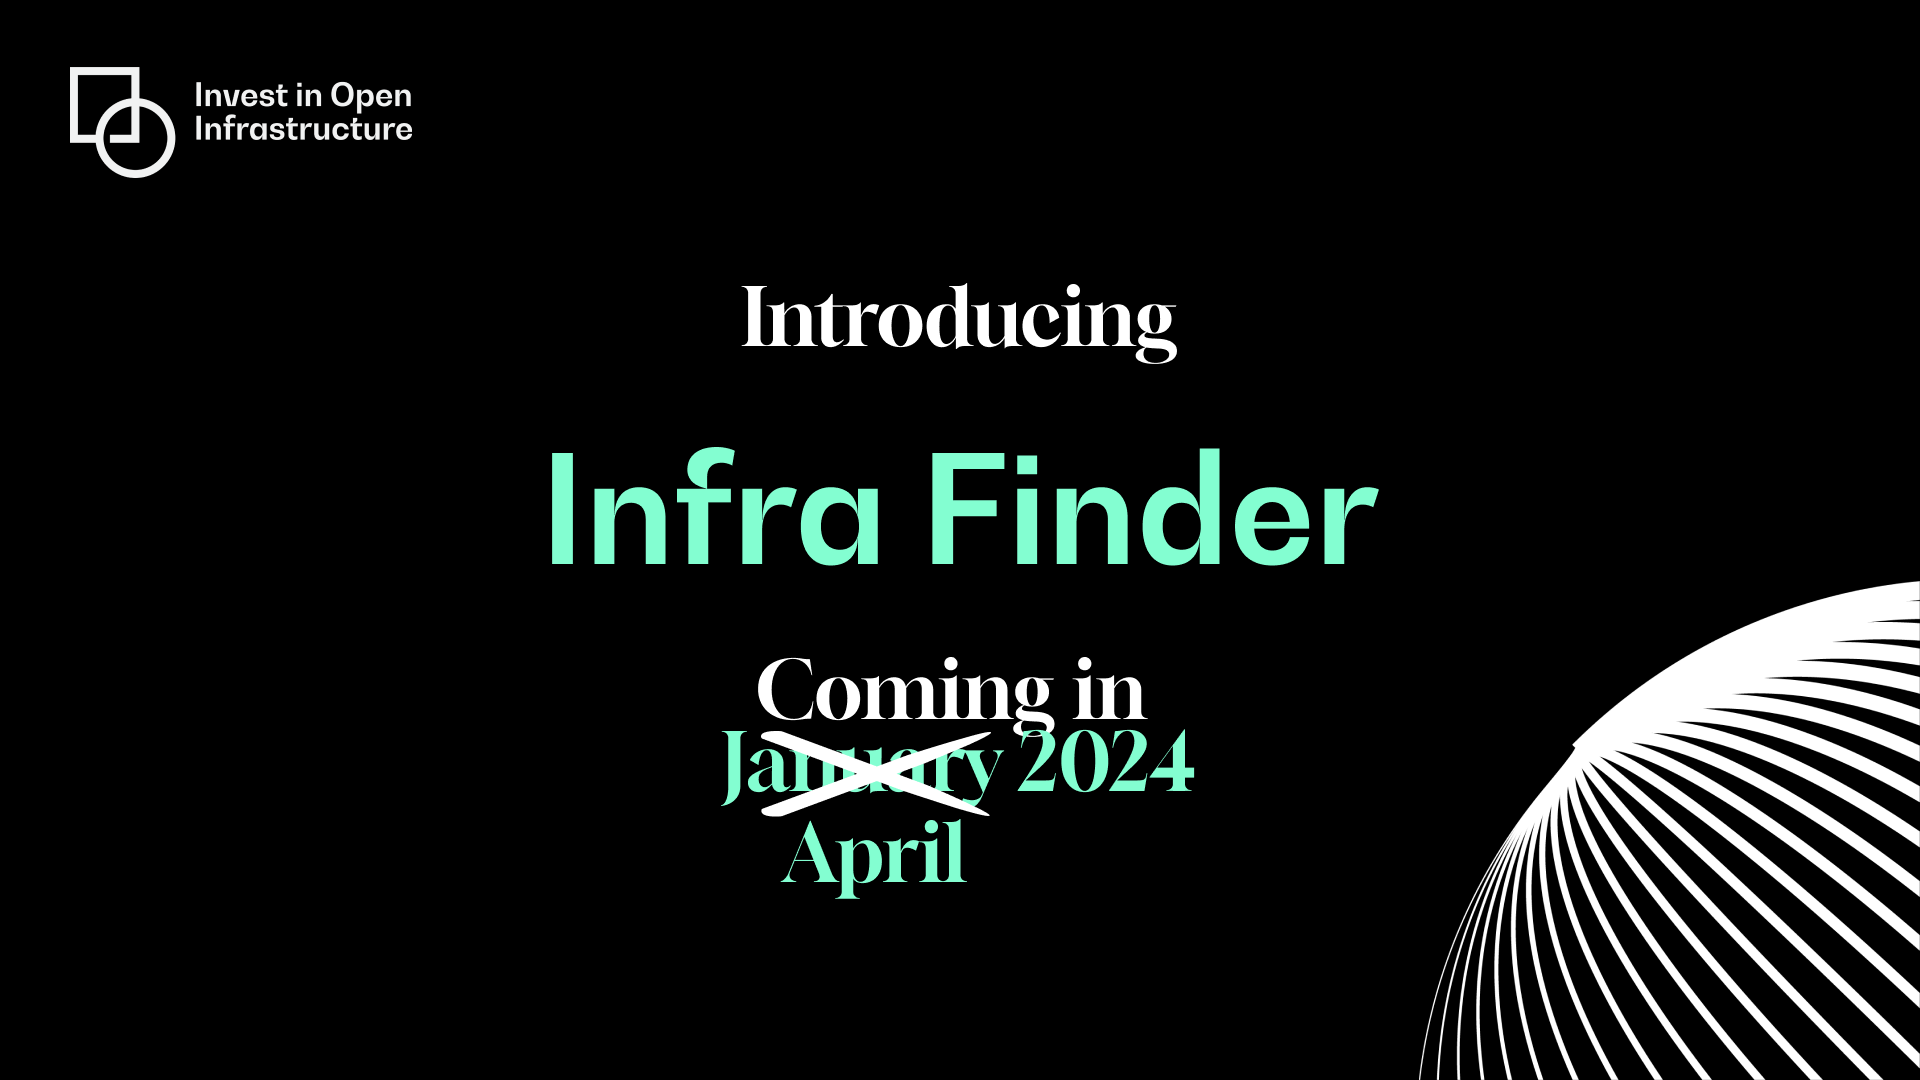 White and mint colored text on a black background. Text reads "Introducing Infra Finder. Coming in January 2024". January is crossed out and replaced with "April". 